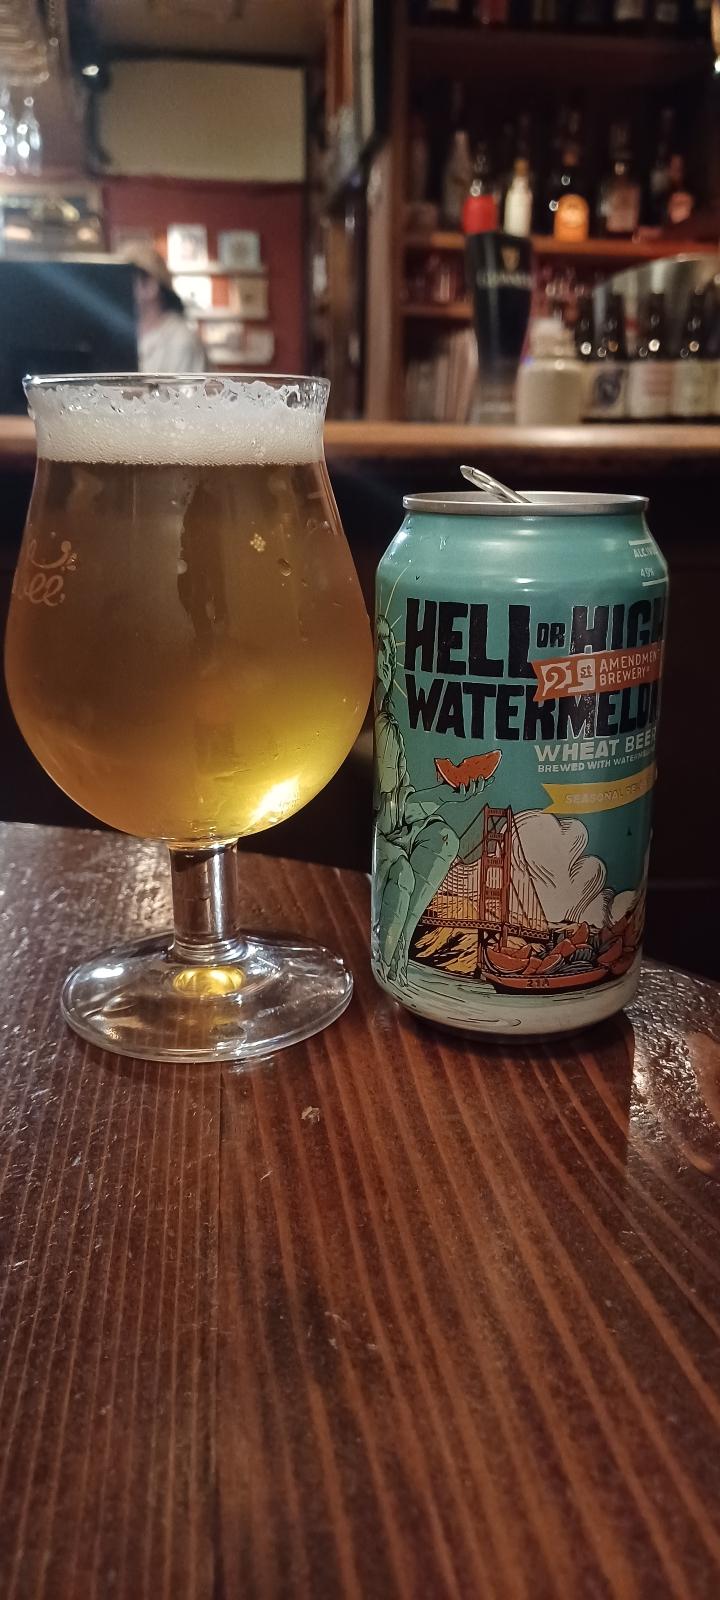 Hell Or High Watermelon